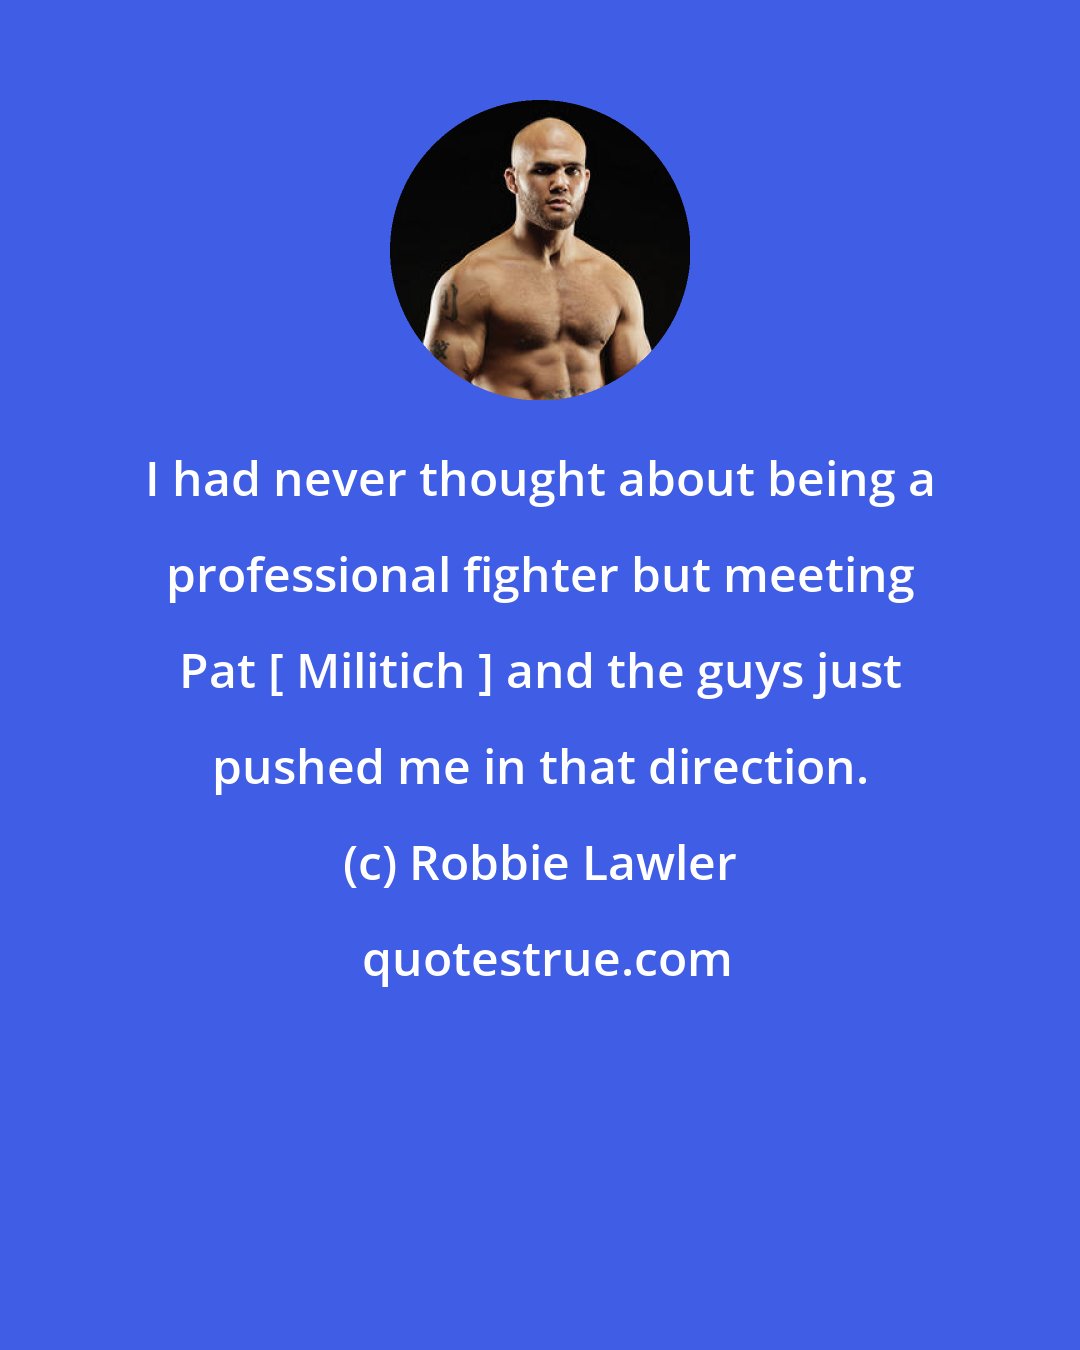 Robbie Lawler: I had never thought about being a professional fighter but meeting Pat [ Militich ] and the guys just pushed me in that direction.